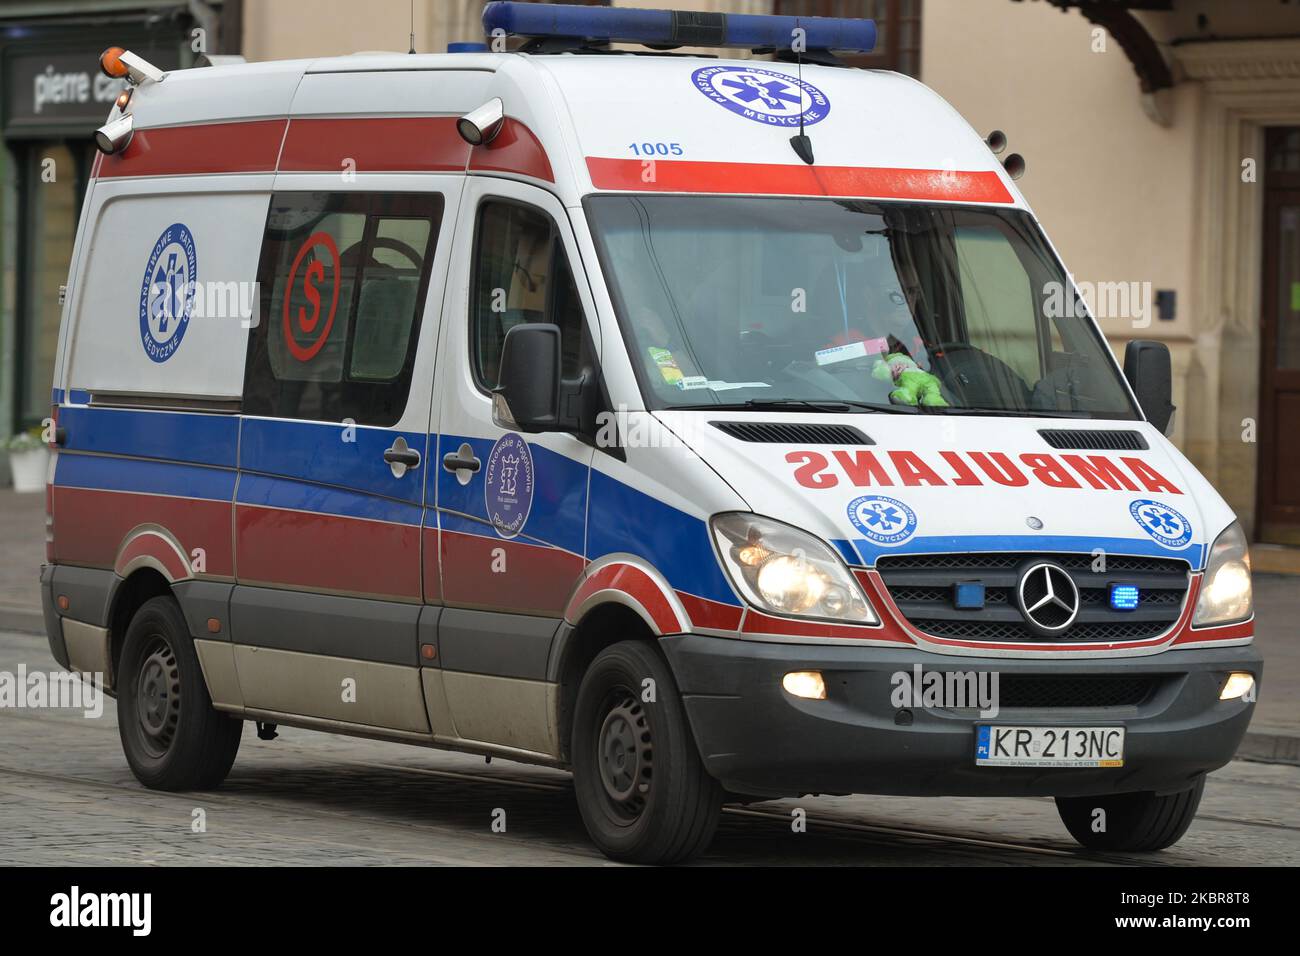 An ambulance seen in Krakow's Old Town. Poland surpased today 30,000 coronavirus cases. In one month, a total number increased by 10,000 new cases. Poland The Health Ministry reported today 407 new cases and 16 deaths, rising the total count to 30,195 people infected, 1,272 deaths and 14,654 recovered. On June 16, 2020, in Krakow, Poland. (Photo by Artur Widak/NurPhoto) Stock Photo